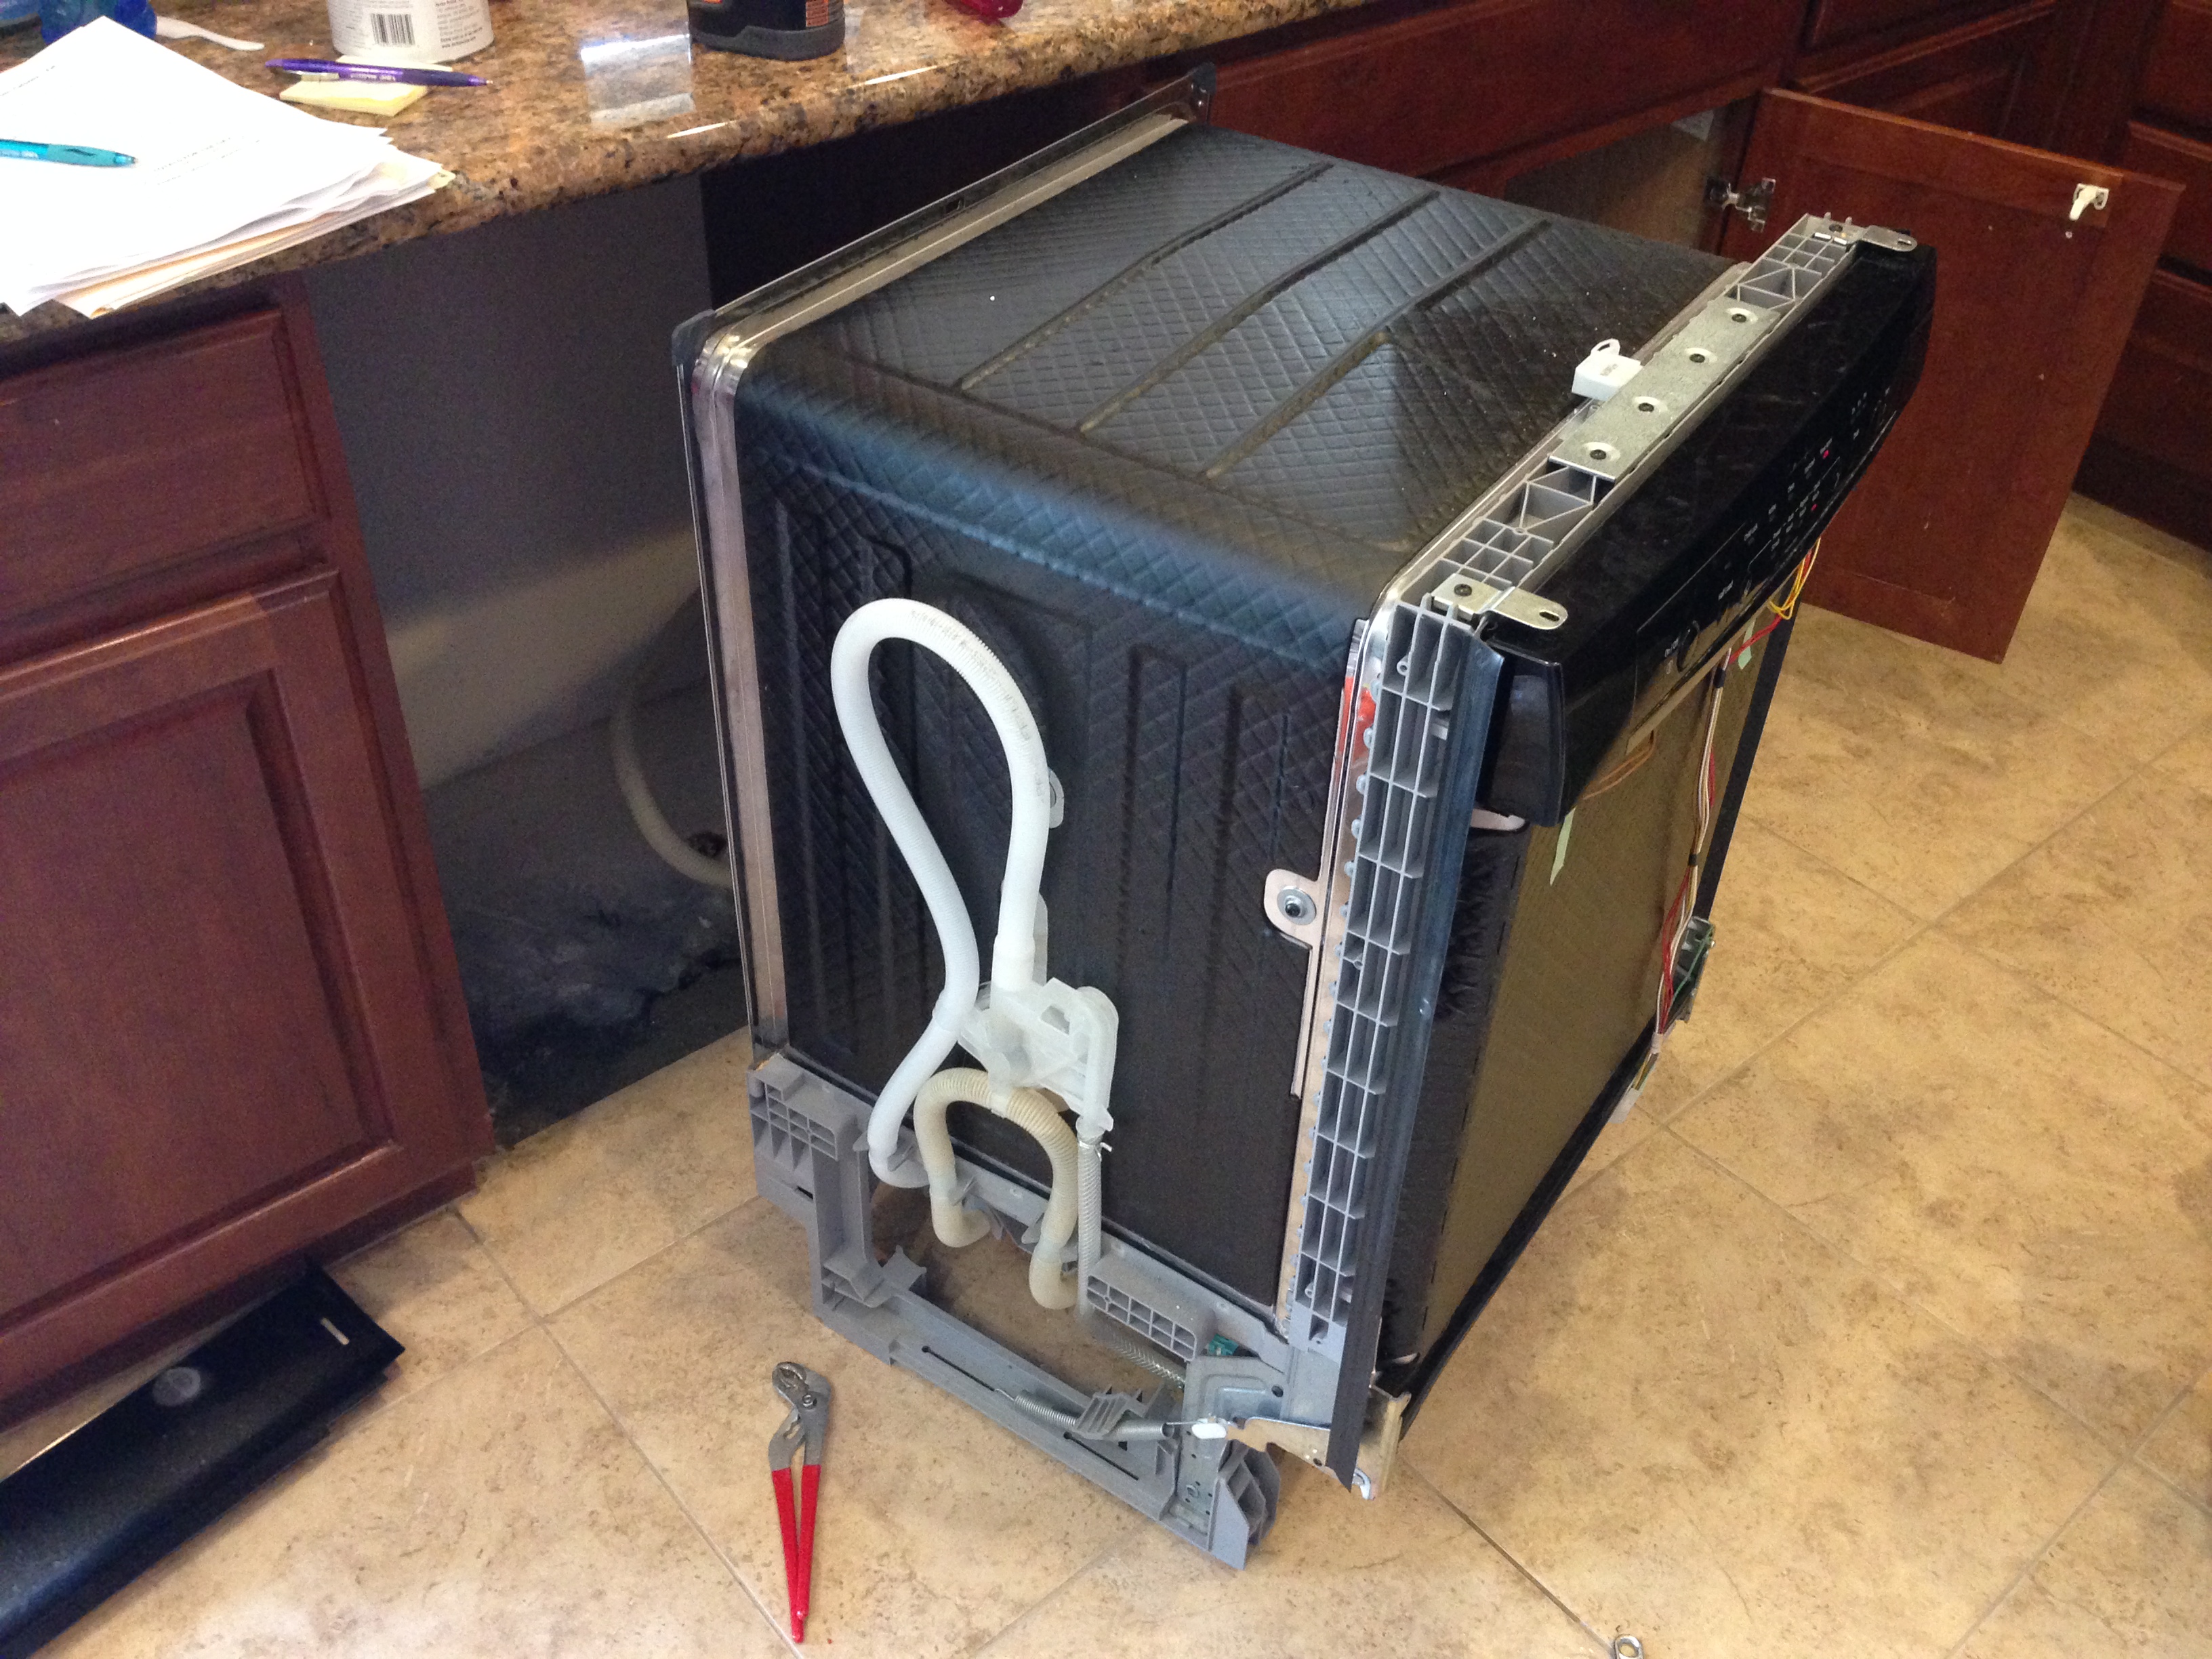 bosch-dishwasher-not-draining-leaving-standing-water-after-the-wash